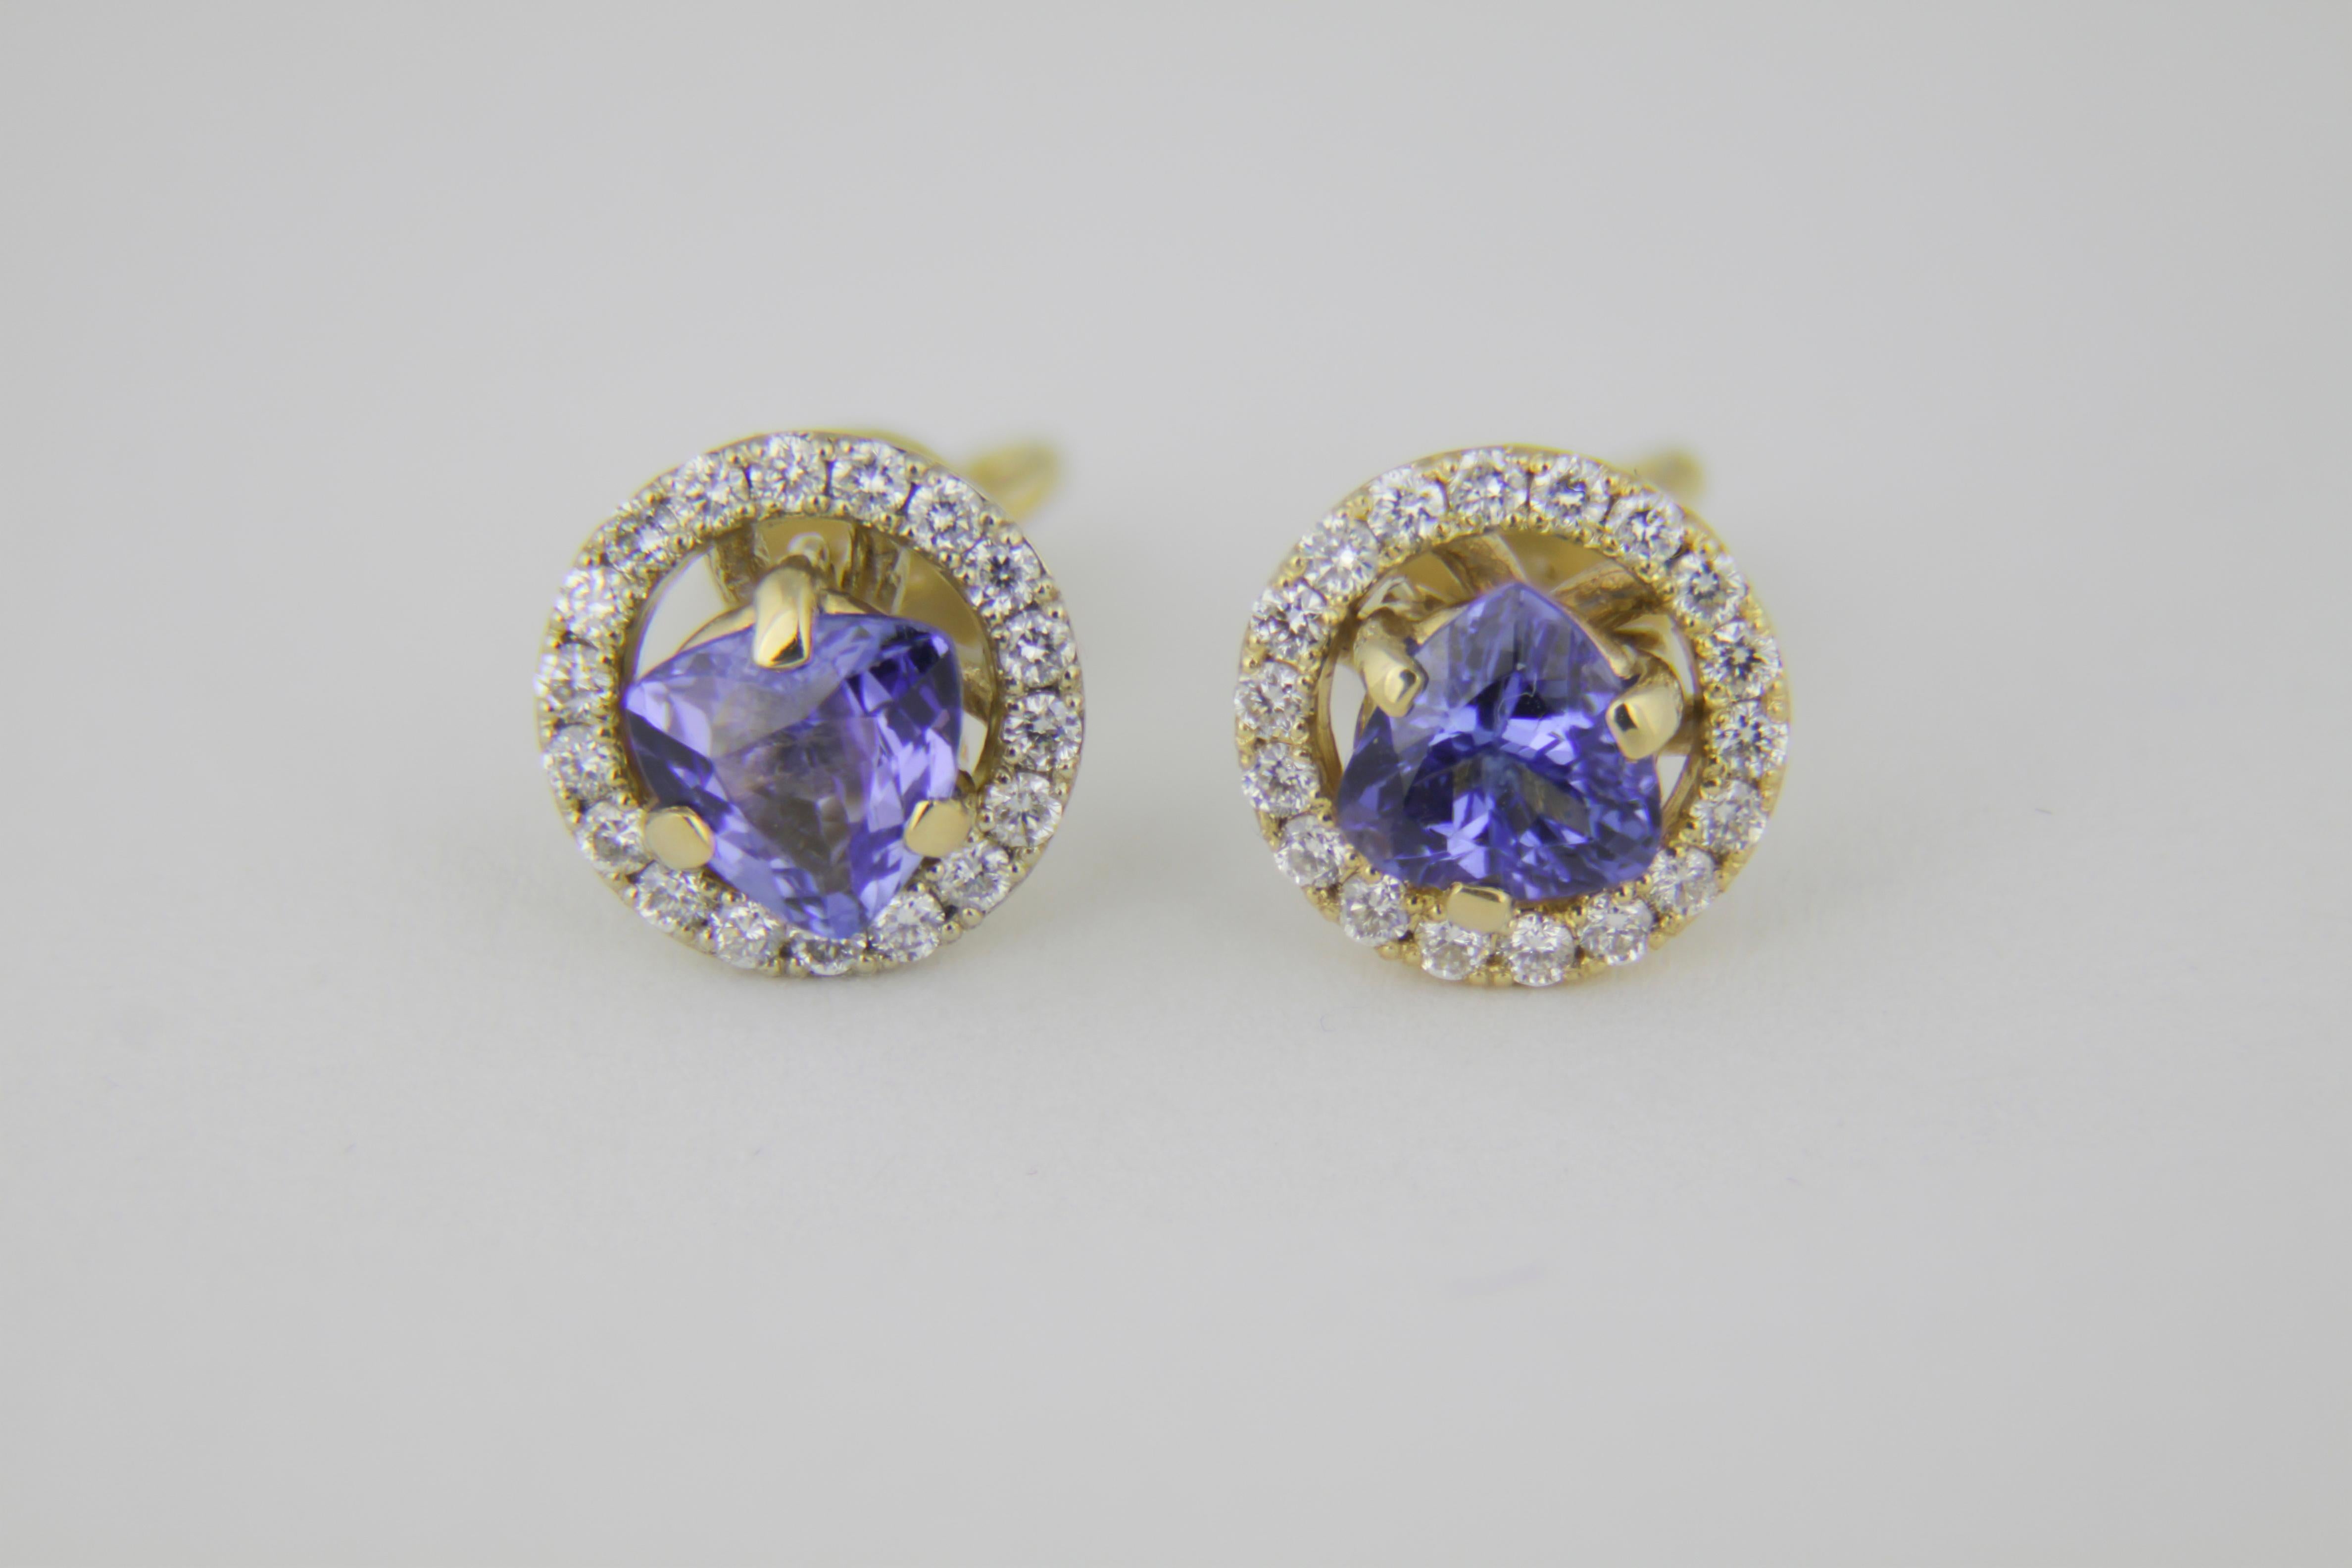 Tanzanites and diamonds 14k gold earrings studs. Removable jackets tanzanite earrings.
Tanzanite Halo Jacket Stud Earrings. 14k White Gold Natural Tanzanite Studs with Halo Jackets.

Metal type: Gold
Metal stamp: 14k Gold
Weight: 2.5 gr
Central